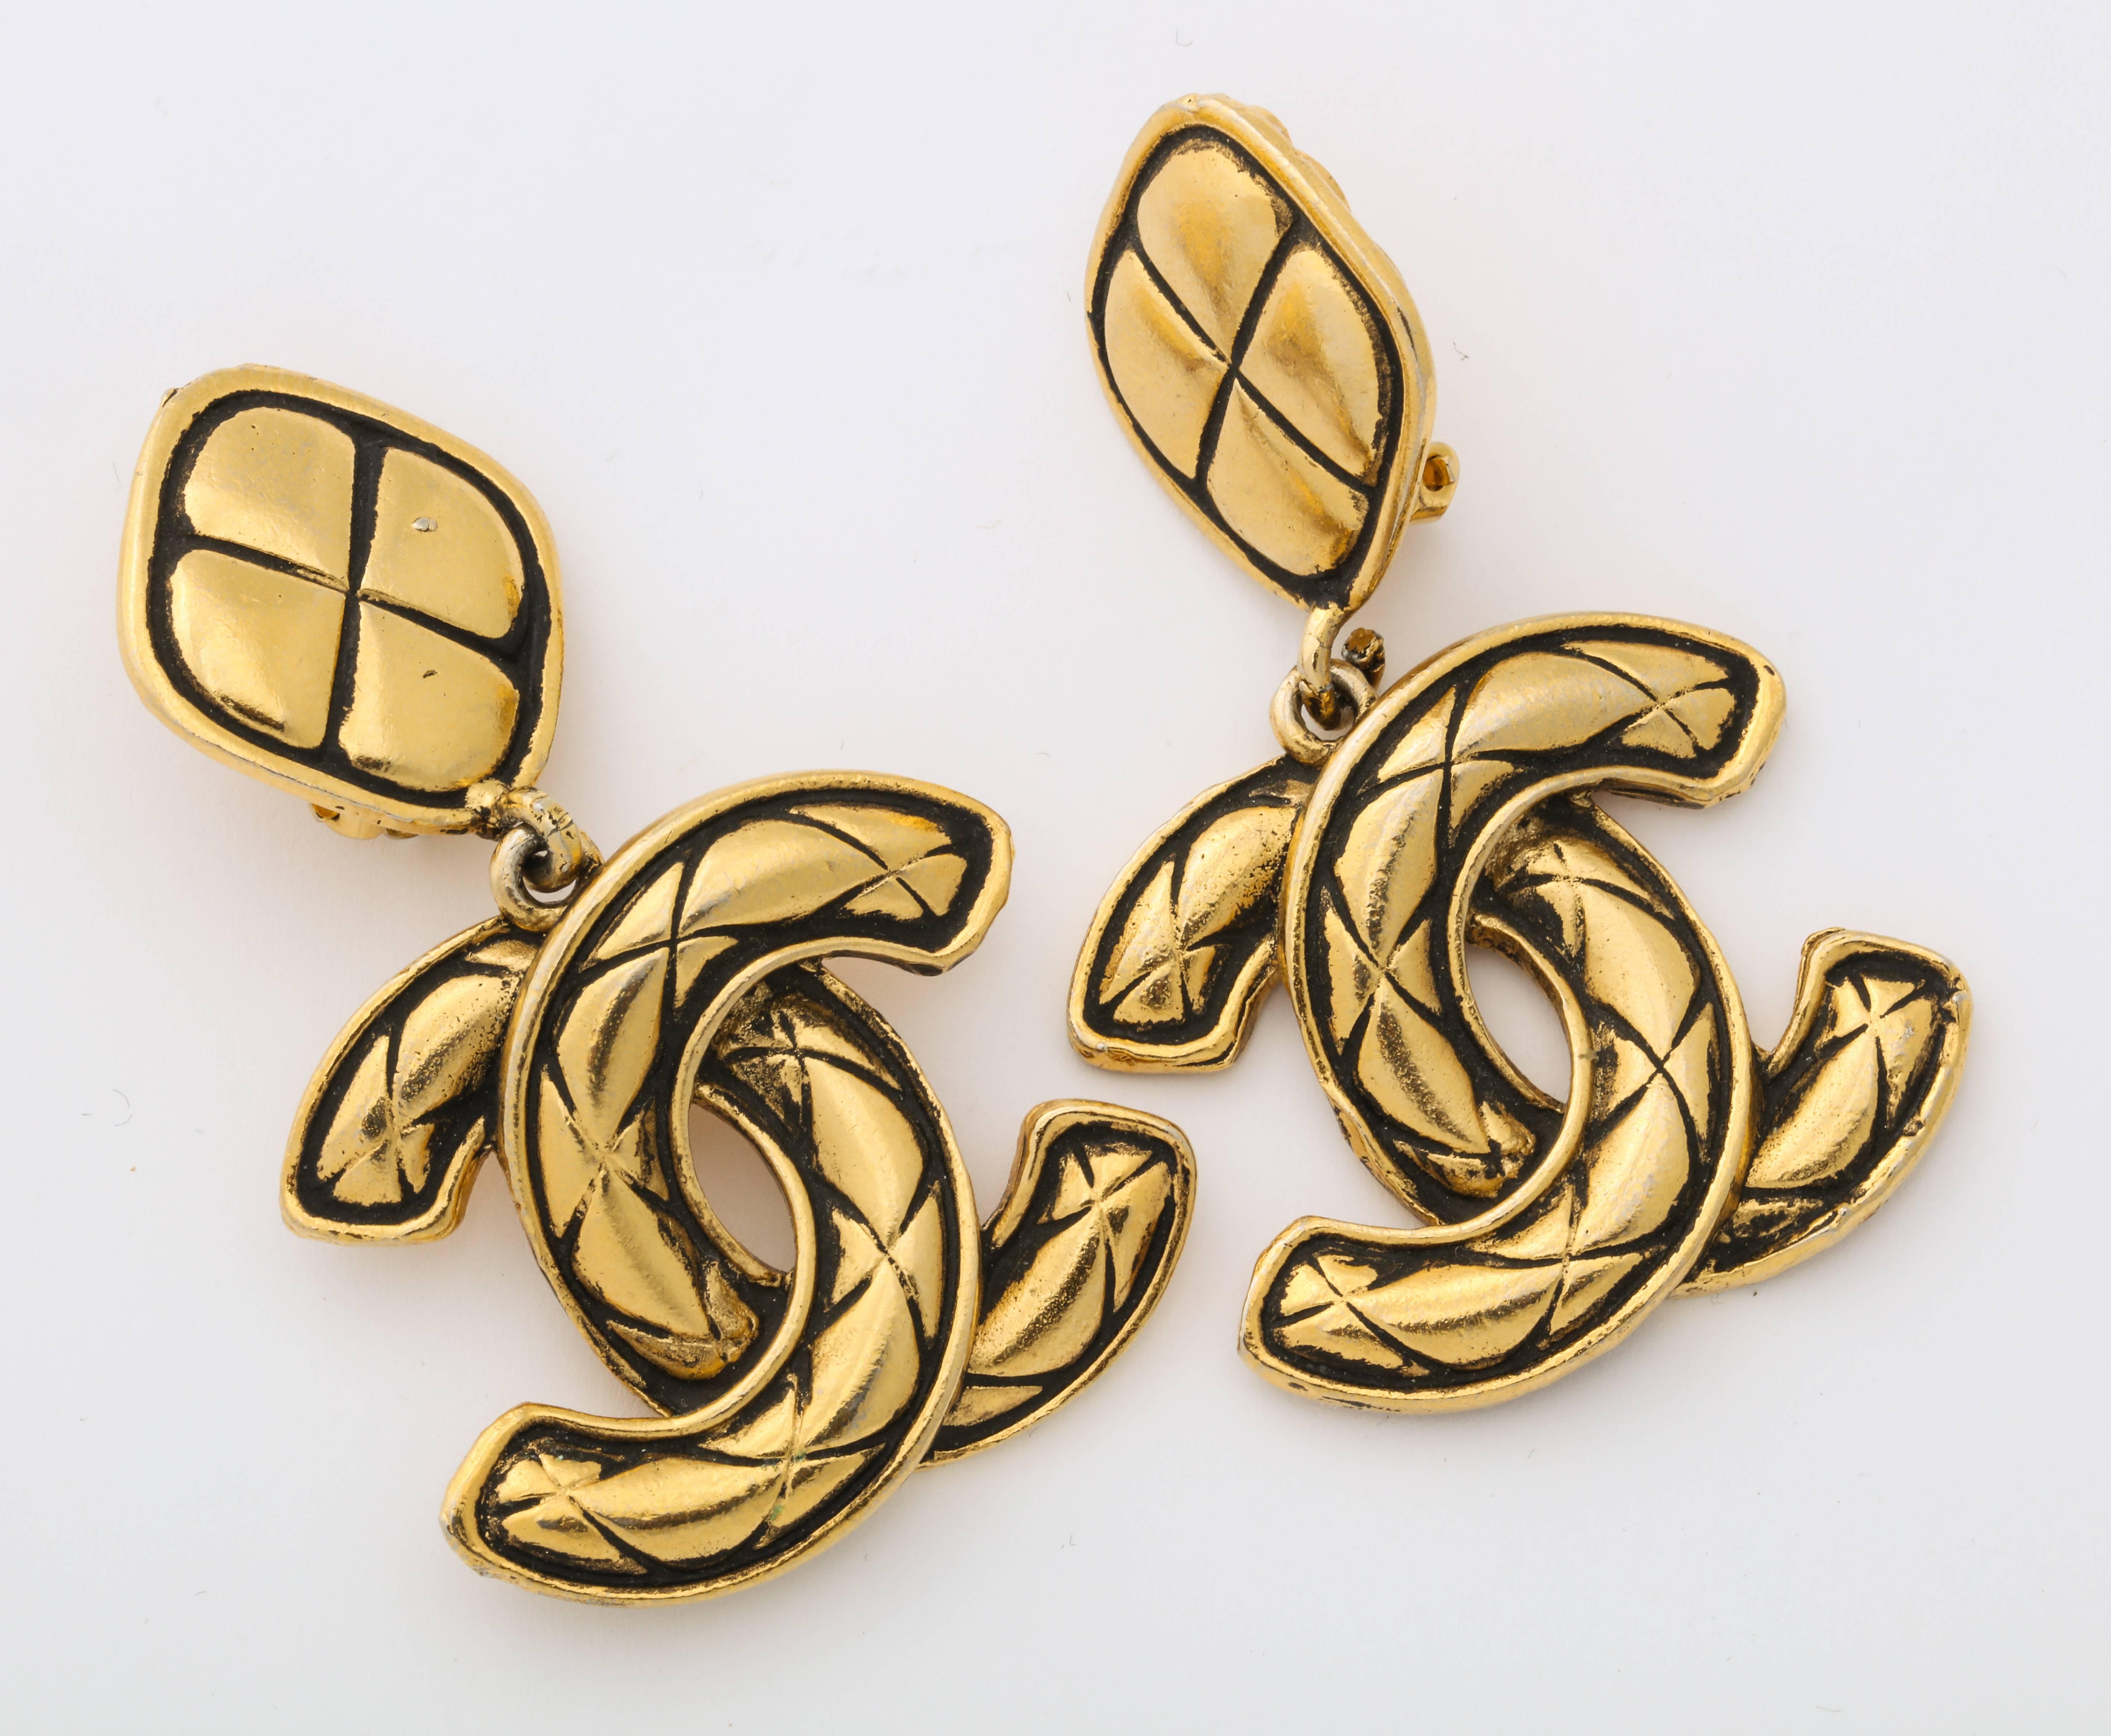 A great pair of vintage Chanel Earrings with the double C logo that hang from a quilted design medallion. Signed with the Chanel mark on the rear Chanel France.